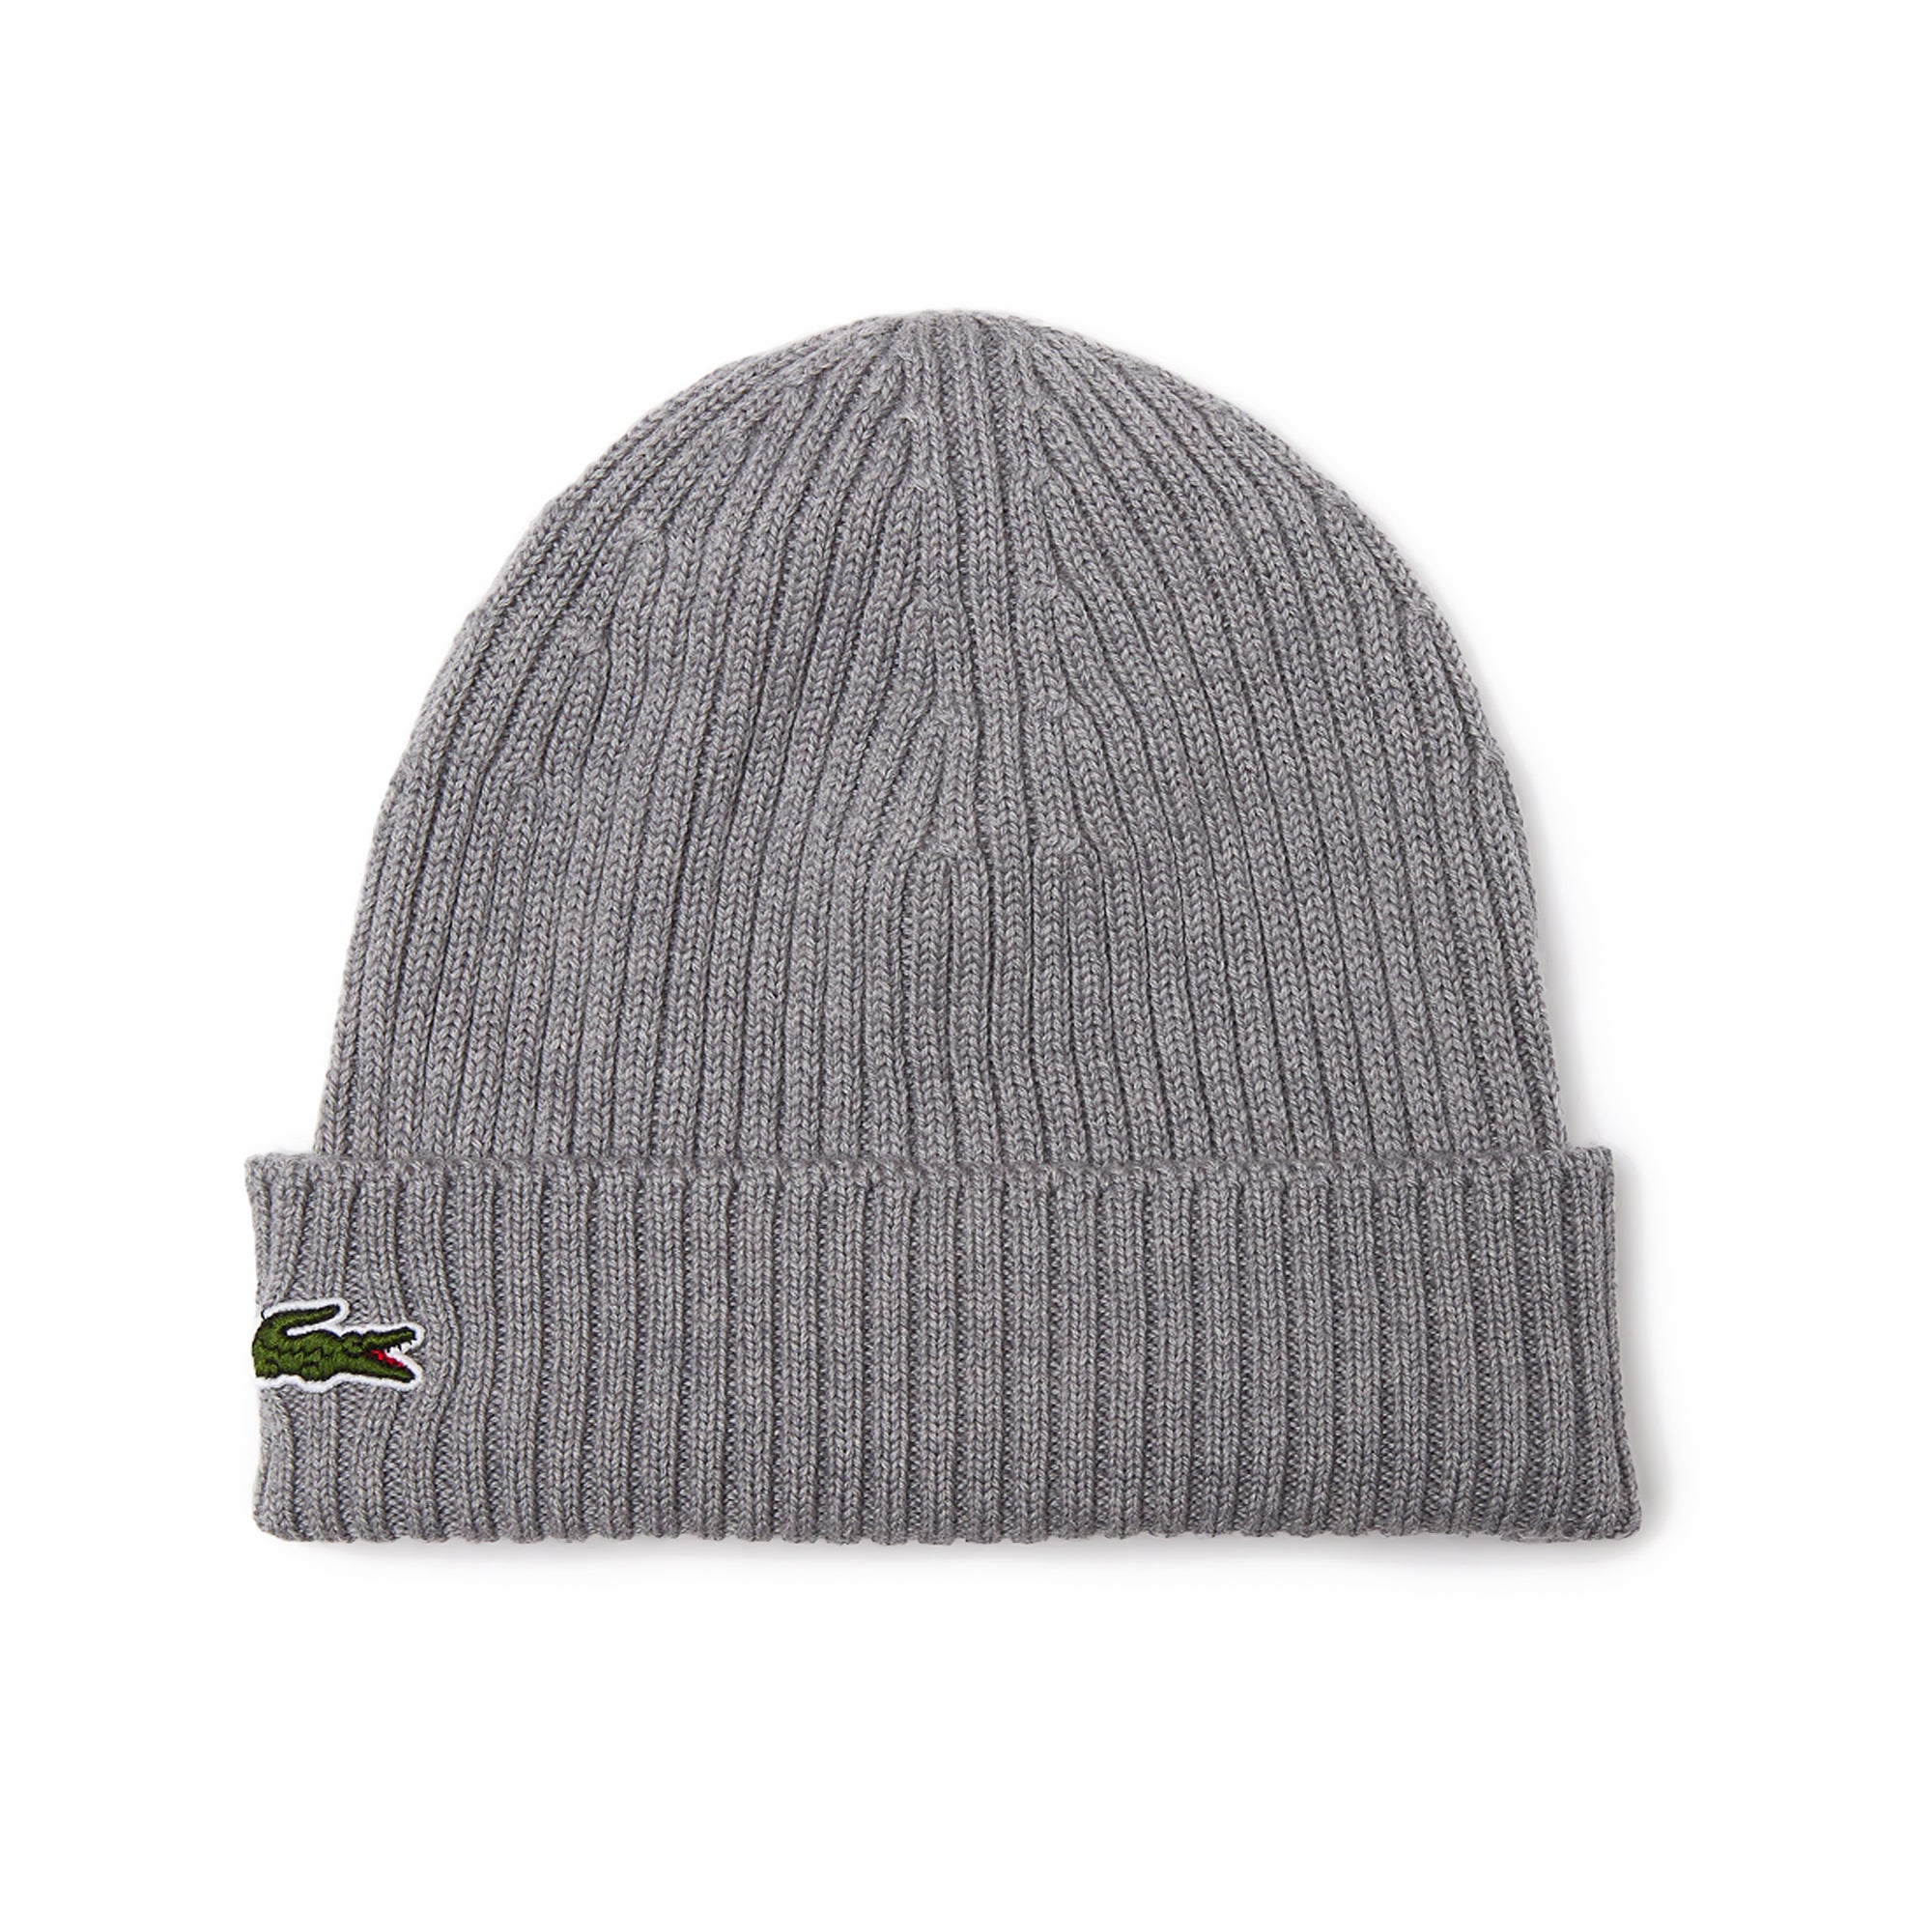 Lacoste RB0001 Beanie - Heather Agate